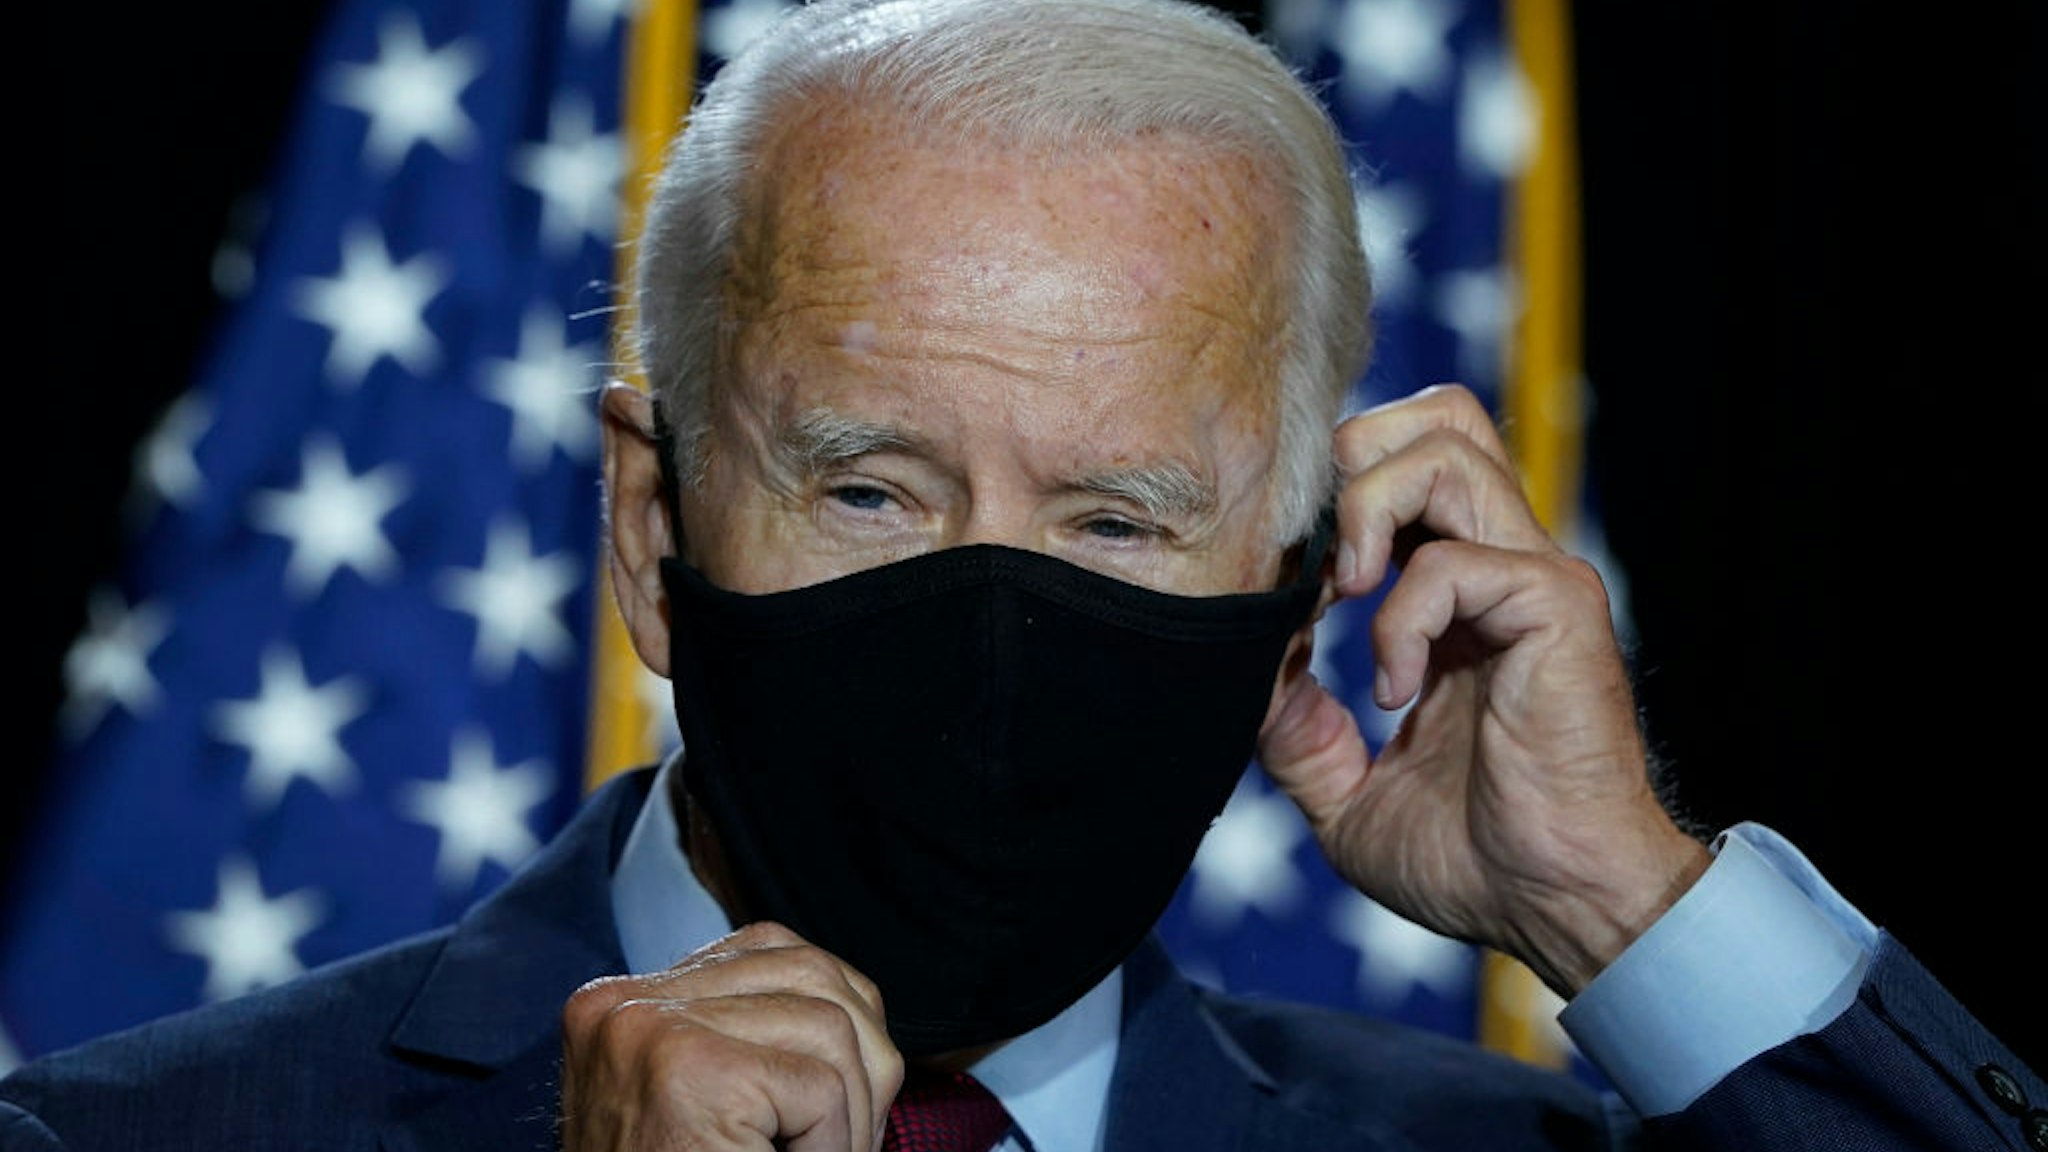 WILMINGTON, DE - AUGUST 13: Presumptive Democratic presidential nominee former Vice President Joe Biden puts his mask back on after delivering remarks following a coronavirus briefing with health experts at the Hotel DuPont on August 13, 2020 in Wilmington, Delaware. Harris is the first Black woman and first person of Indian descent to be a presumptive nominee on a presidential ticket by a major party in U.S. history. (Photo by Drew Angerer/Getty Images)